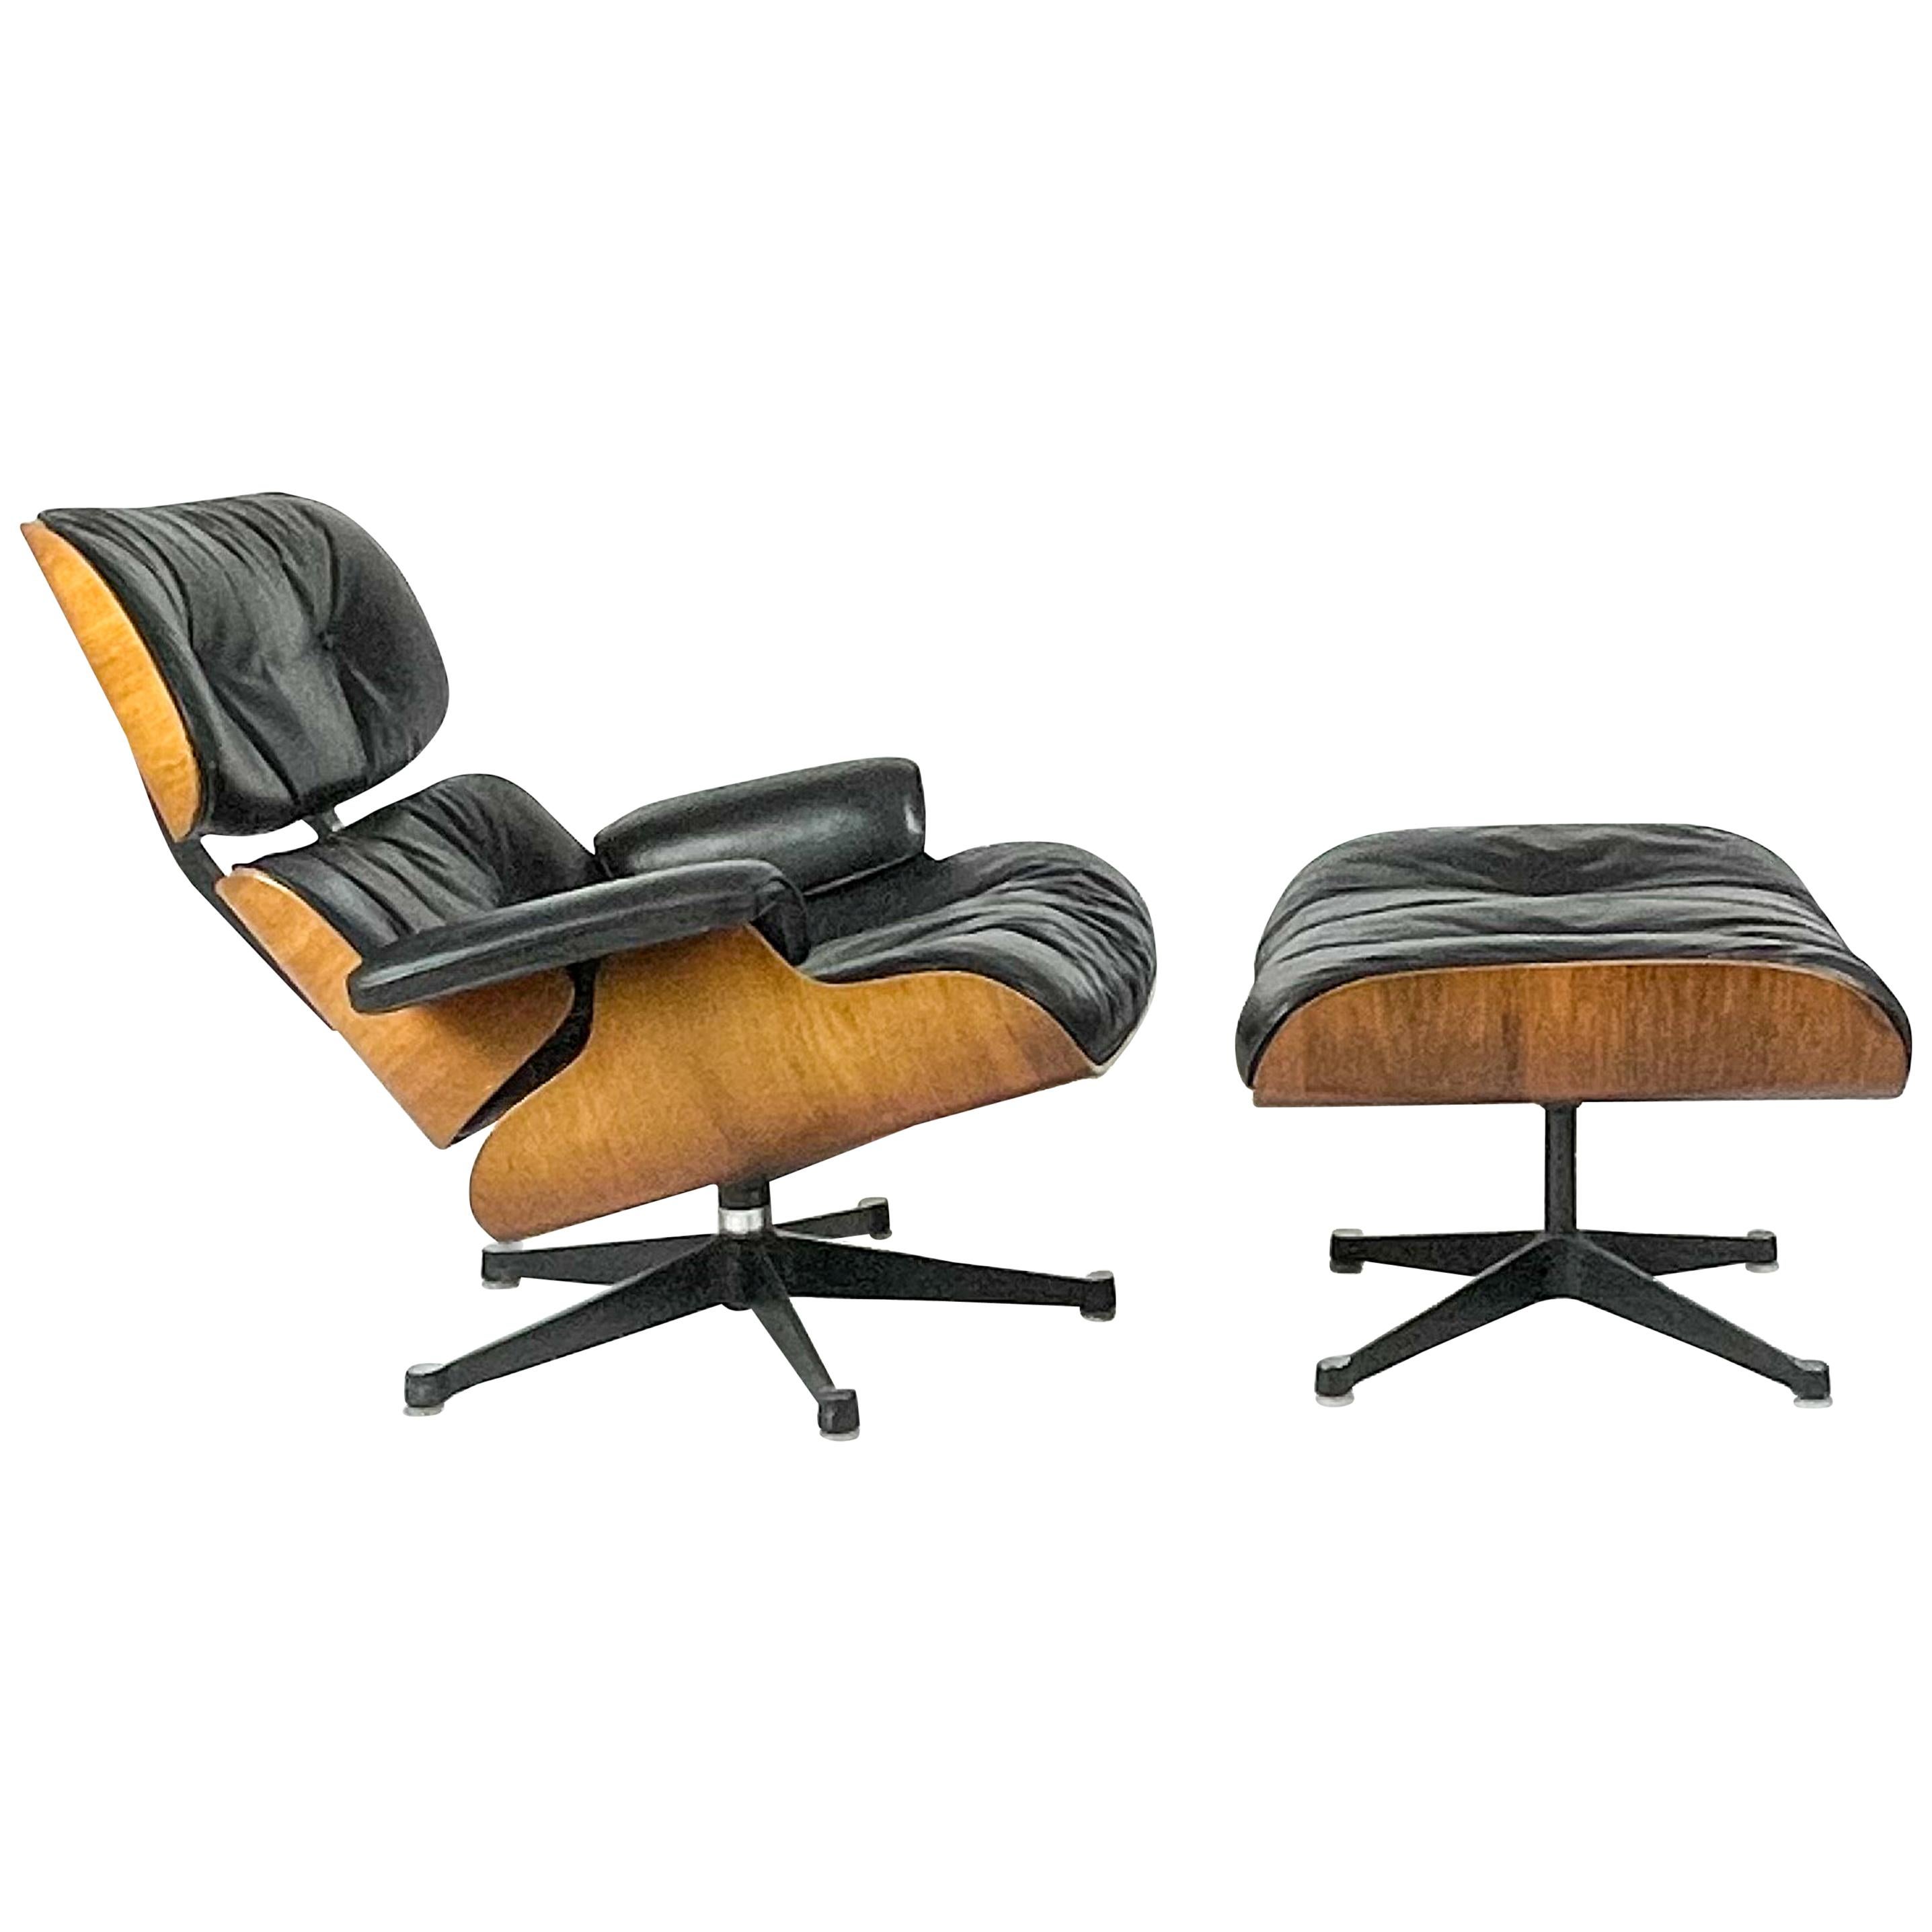 Charles and Ray Eames, Lounge Chair and Ottoman Matching Vintage Set, Vitra 1968